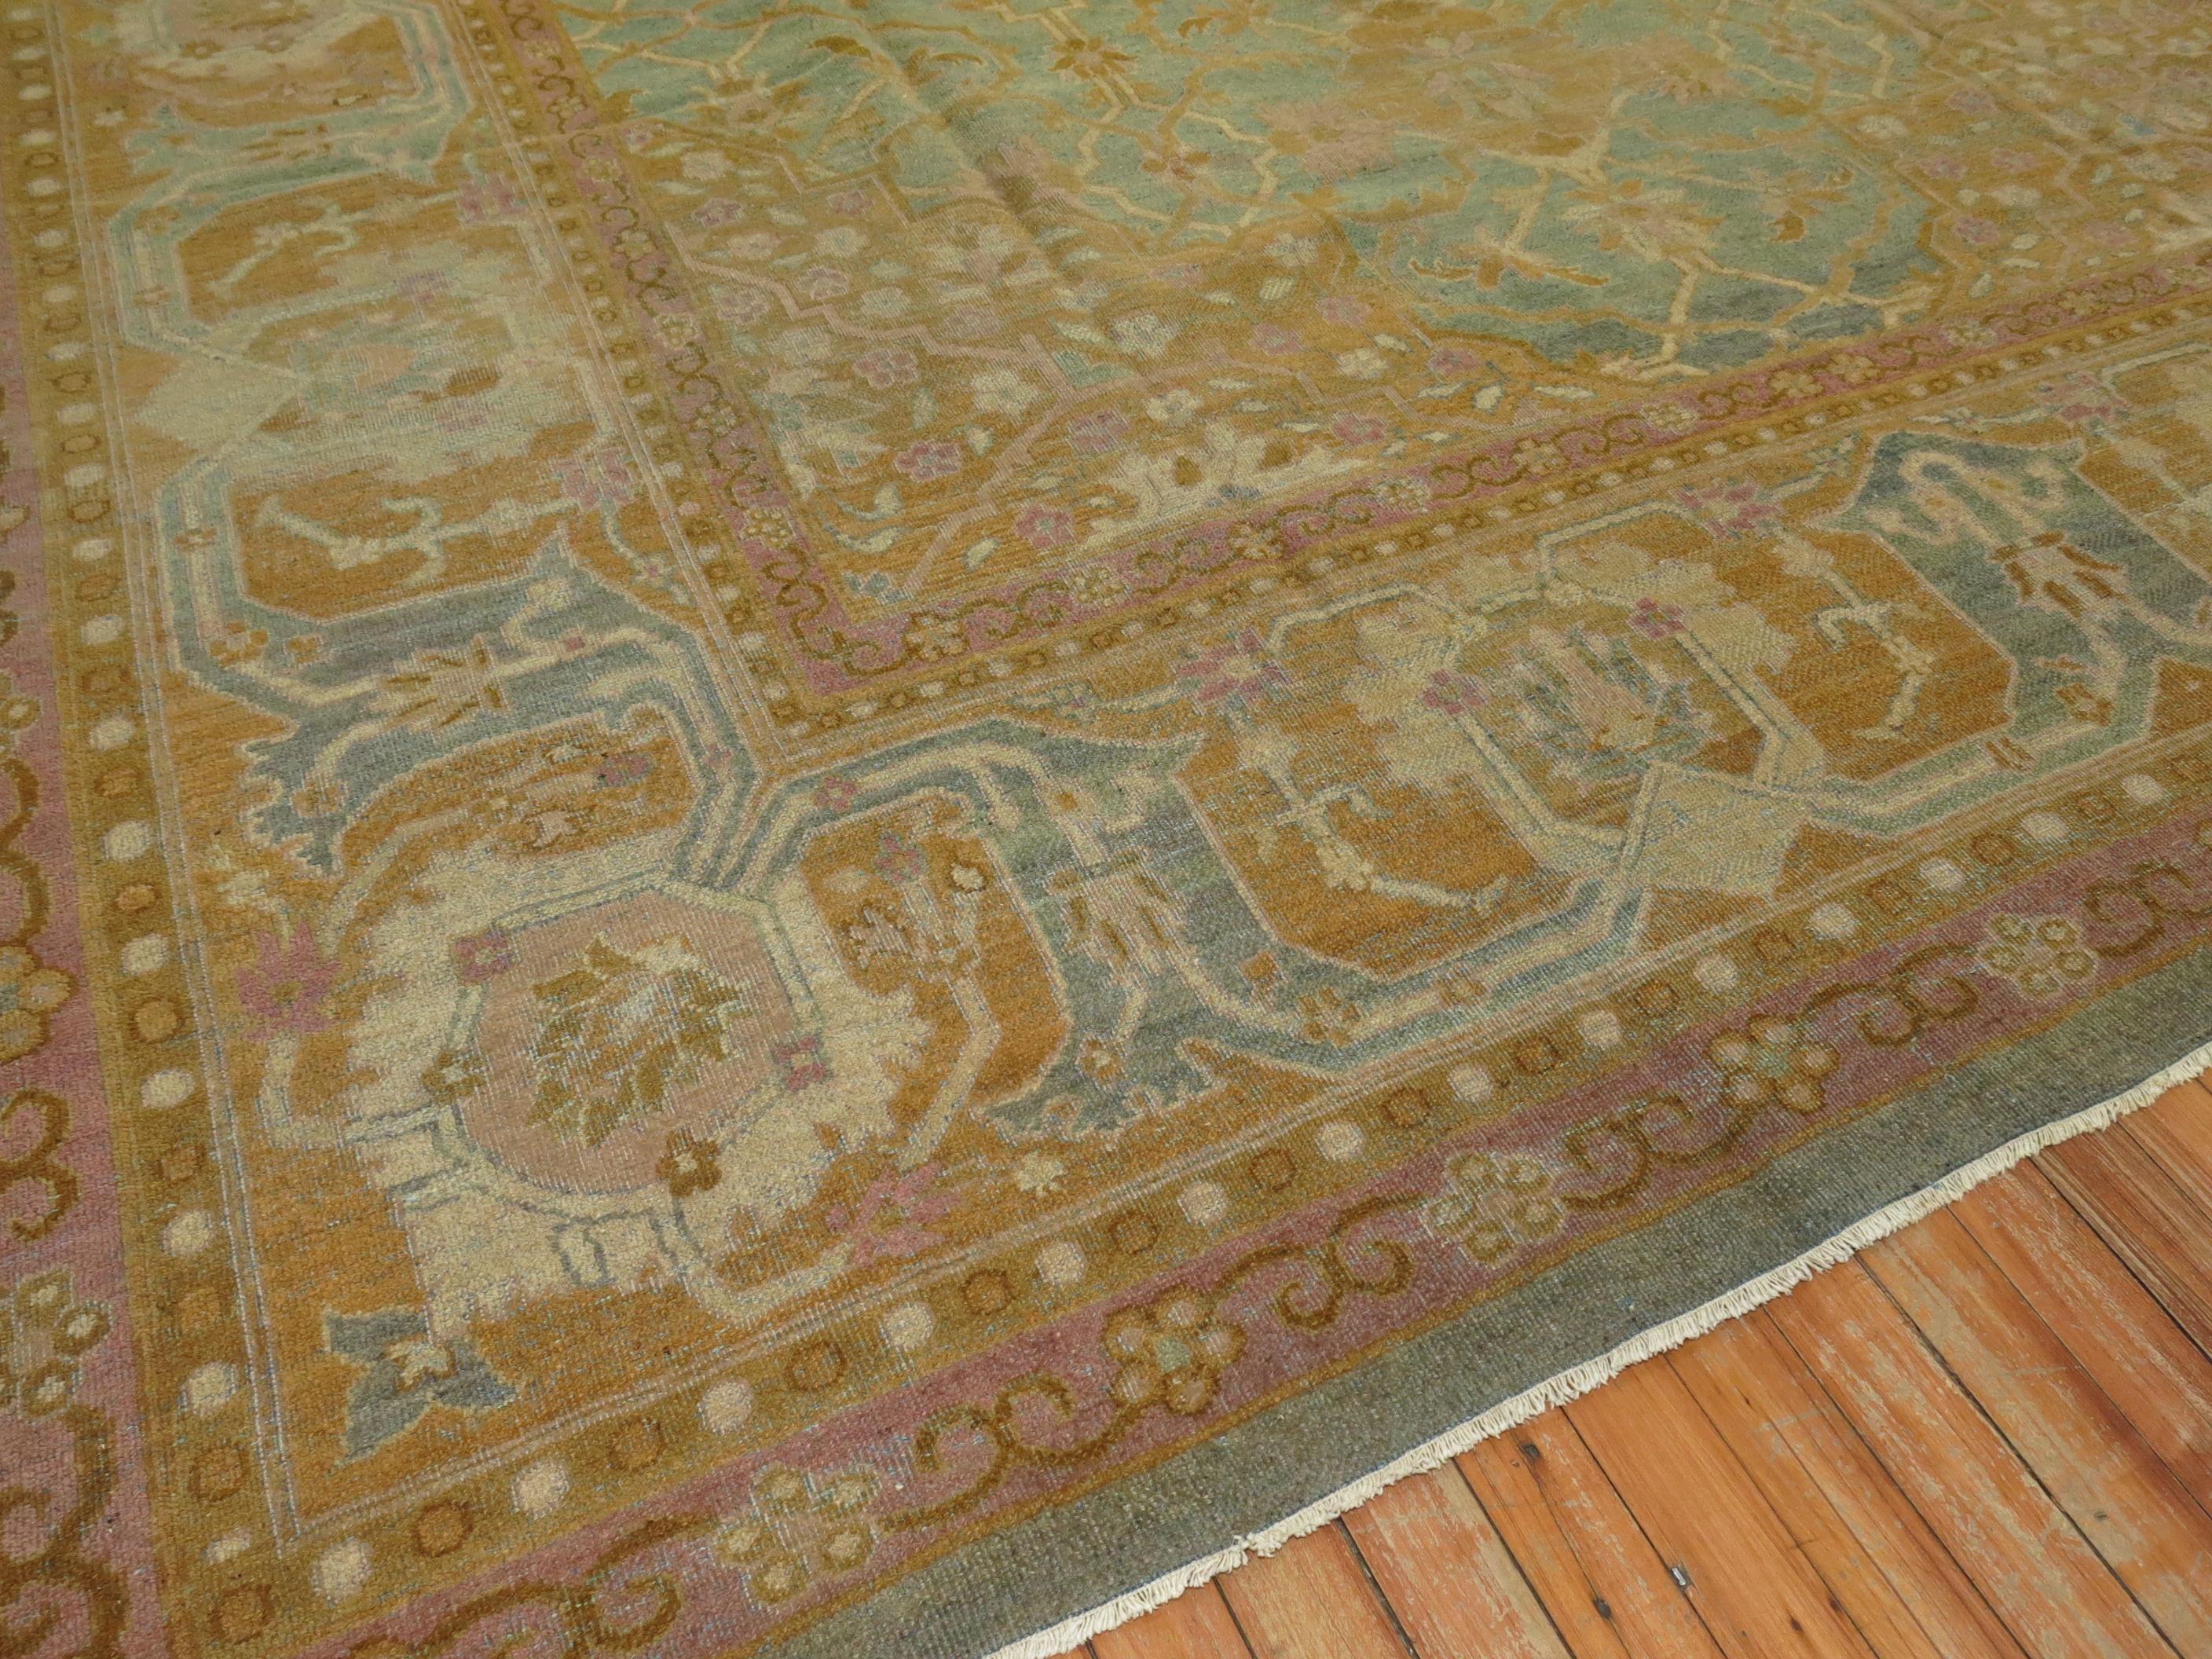 Stunning high decorative room size early 20th century antique Indian Amritsar rug from the early 20th century. Turquoise field, goldenrod, silver, and pink accents,

circa 1900-1910. Measures: 9' x 11'9